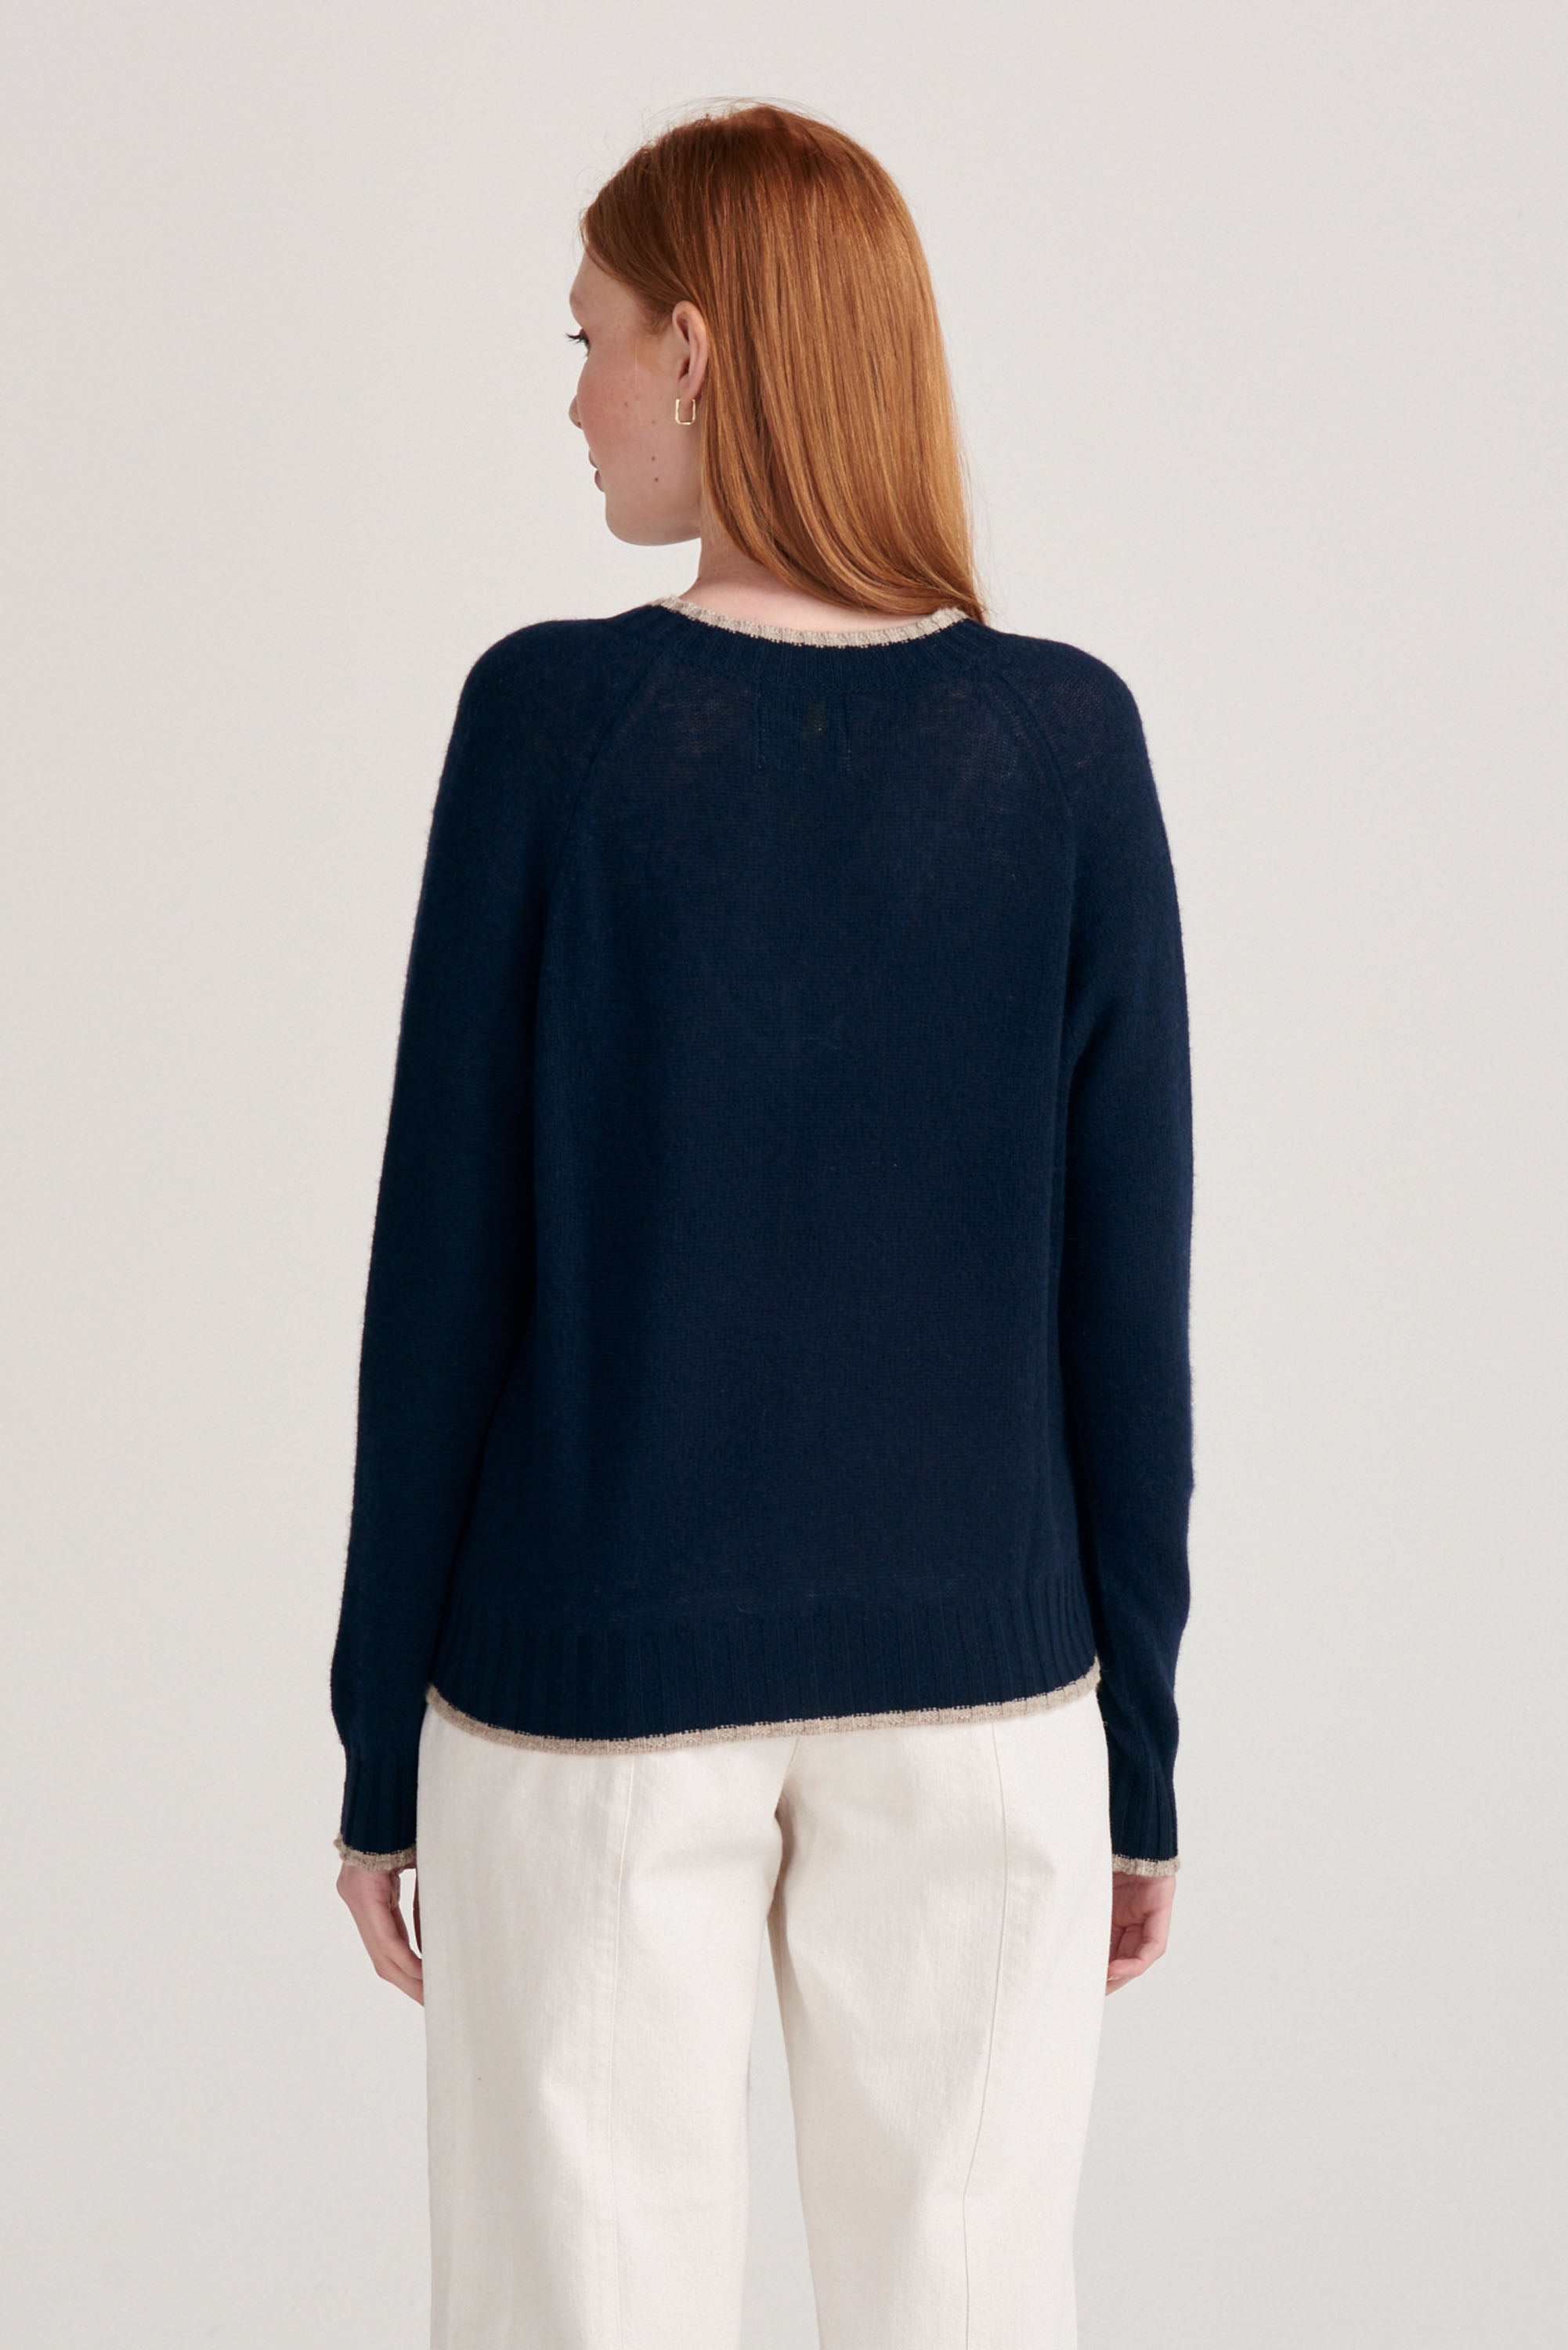 Red haired model wearing Jumper1234 cashmere vee neck jumper in navy with organic light brown tipping facing away from the camera